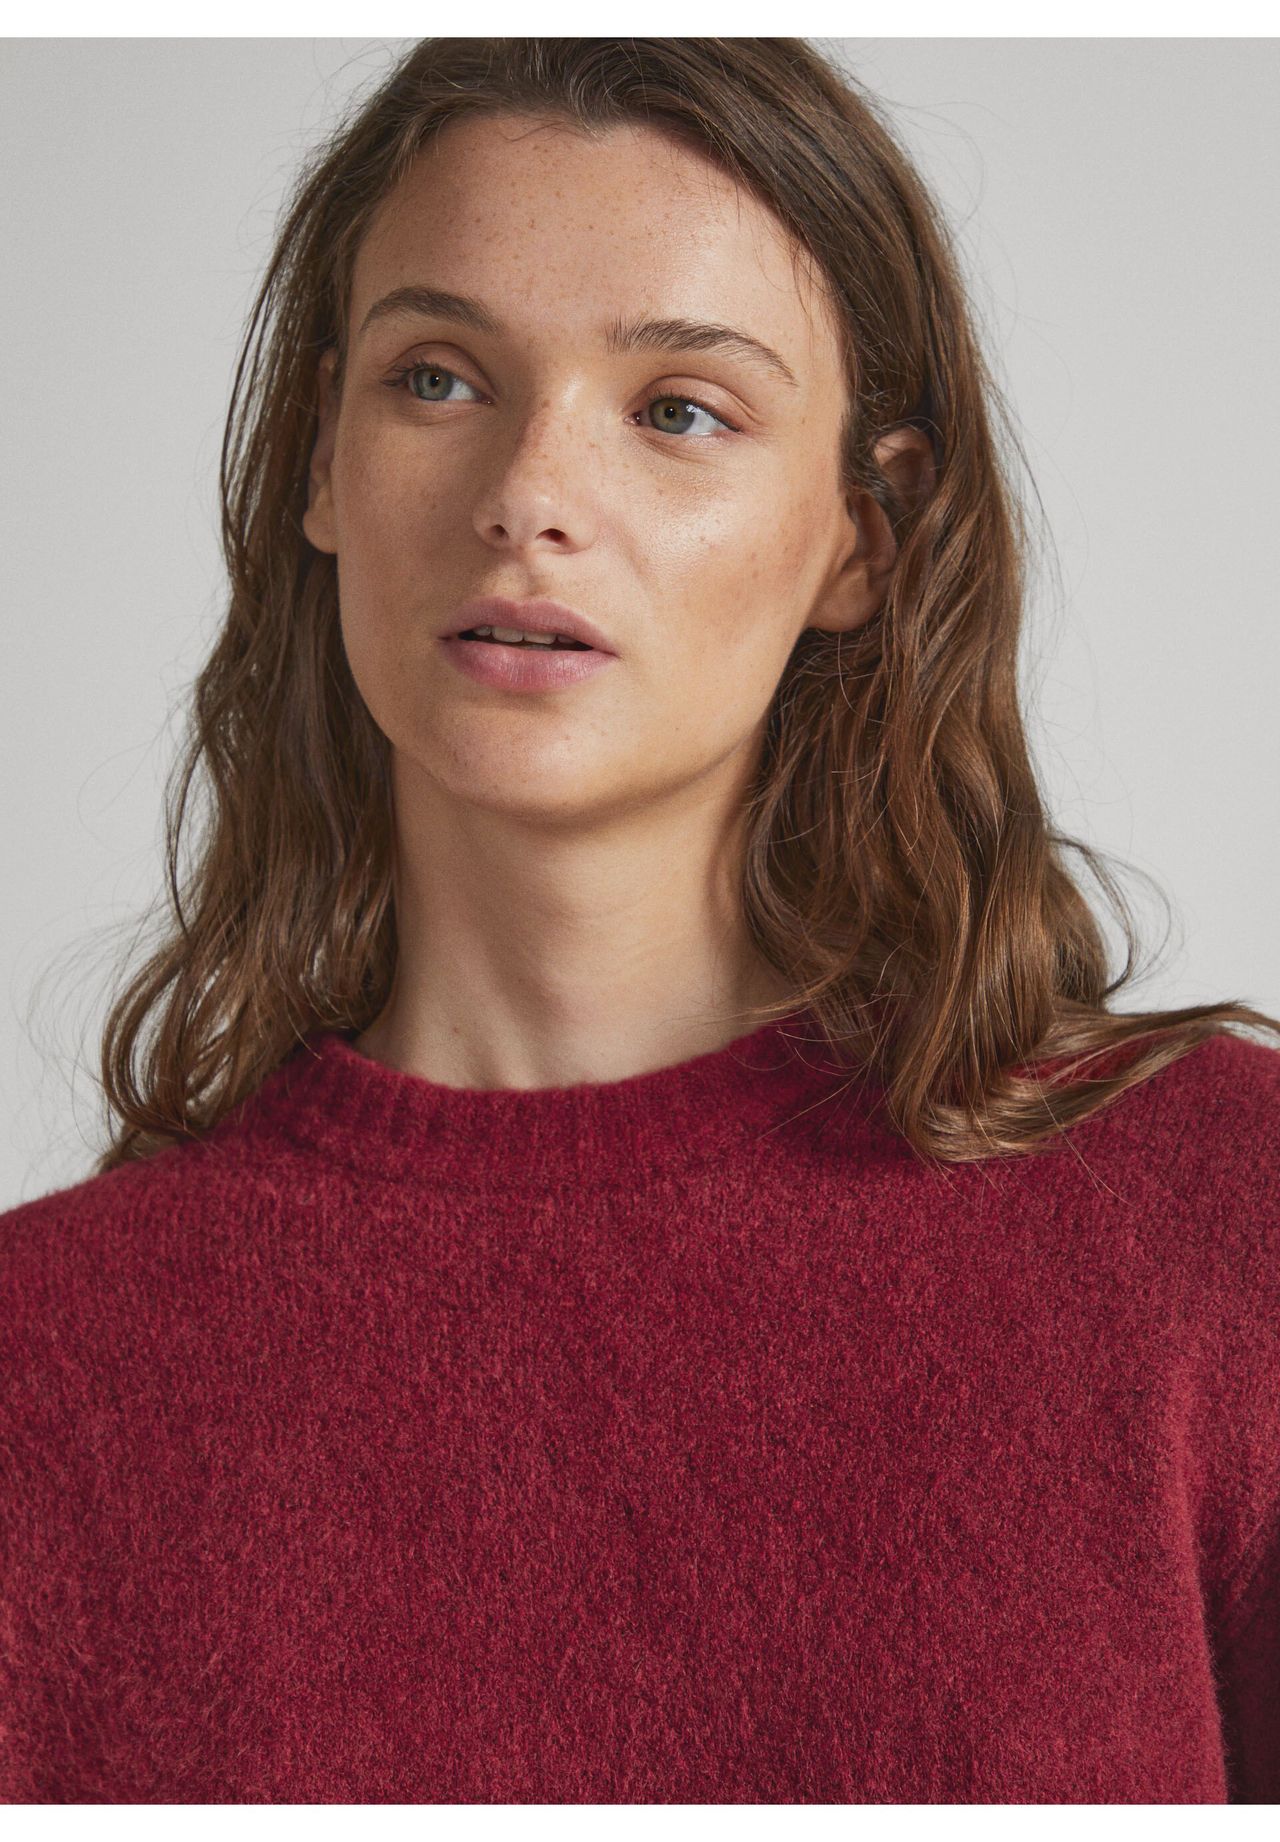 Pepe Jeans Strickpullover 